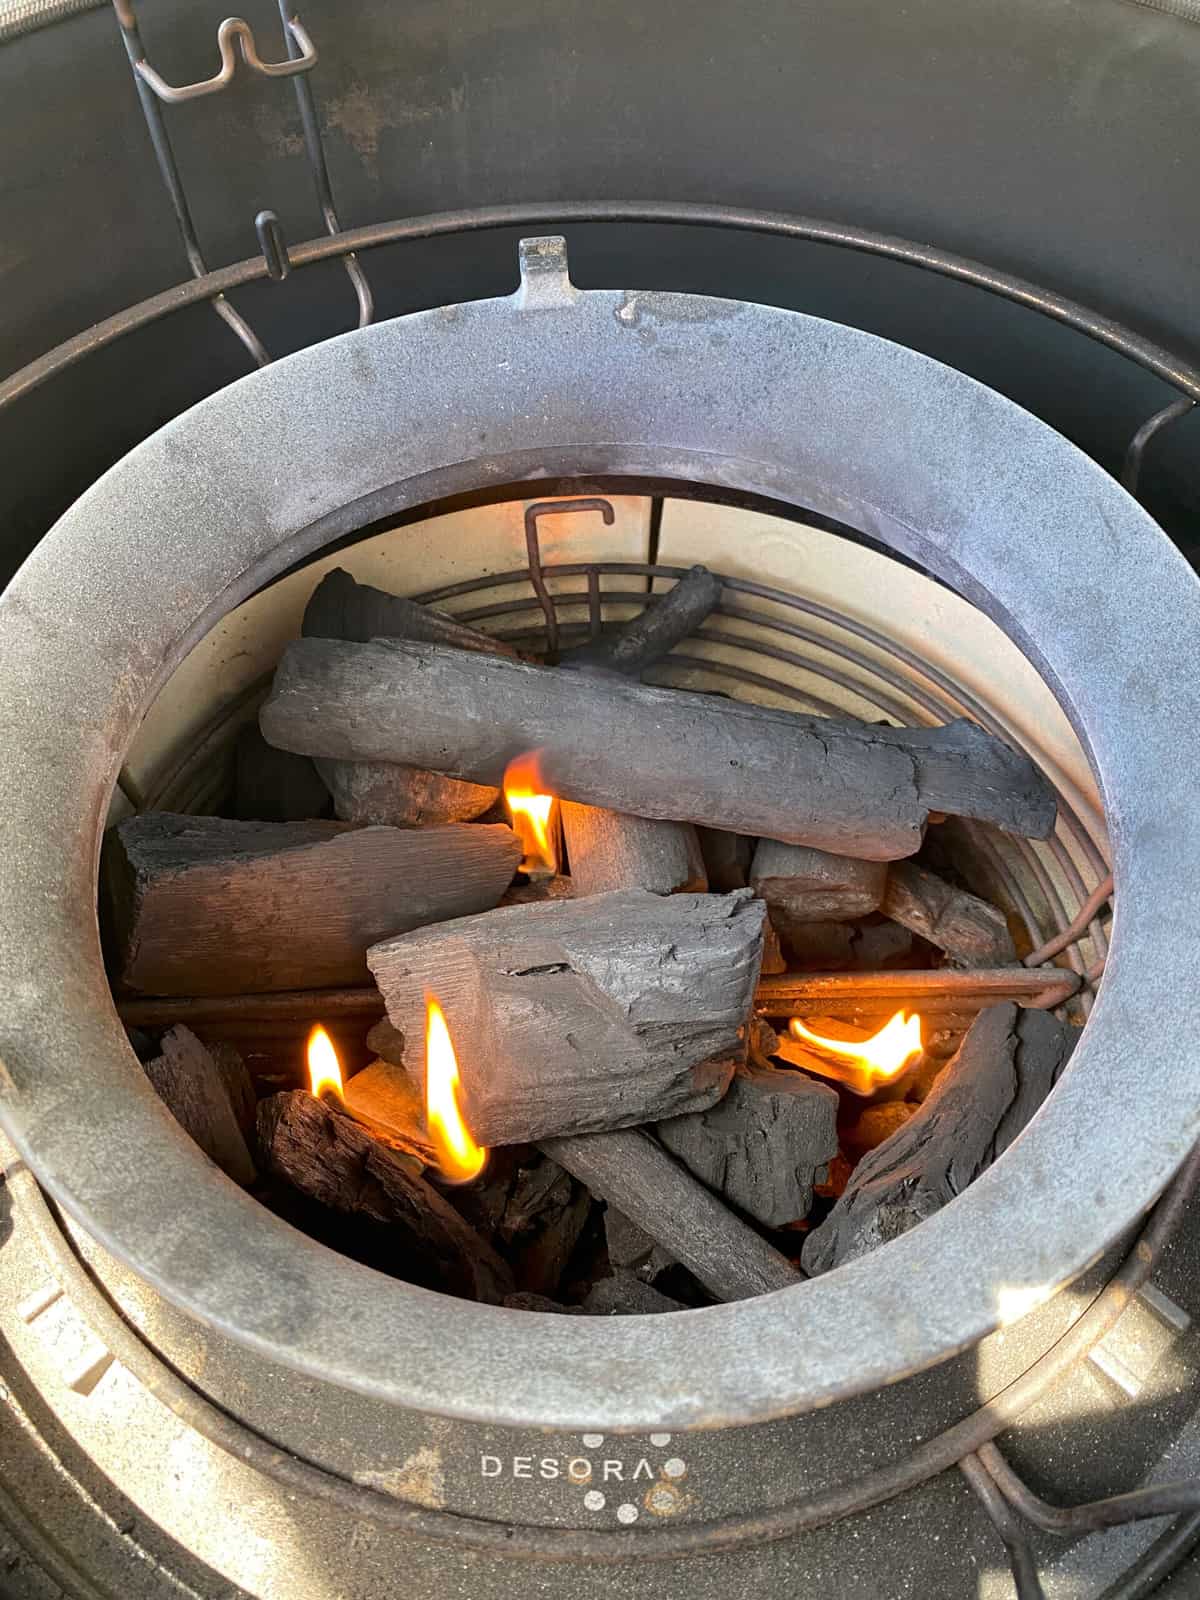 ceramic grill fire getting started for smoked pork butt